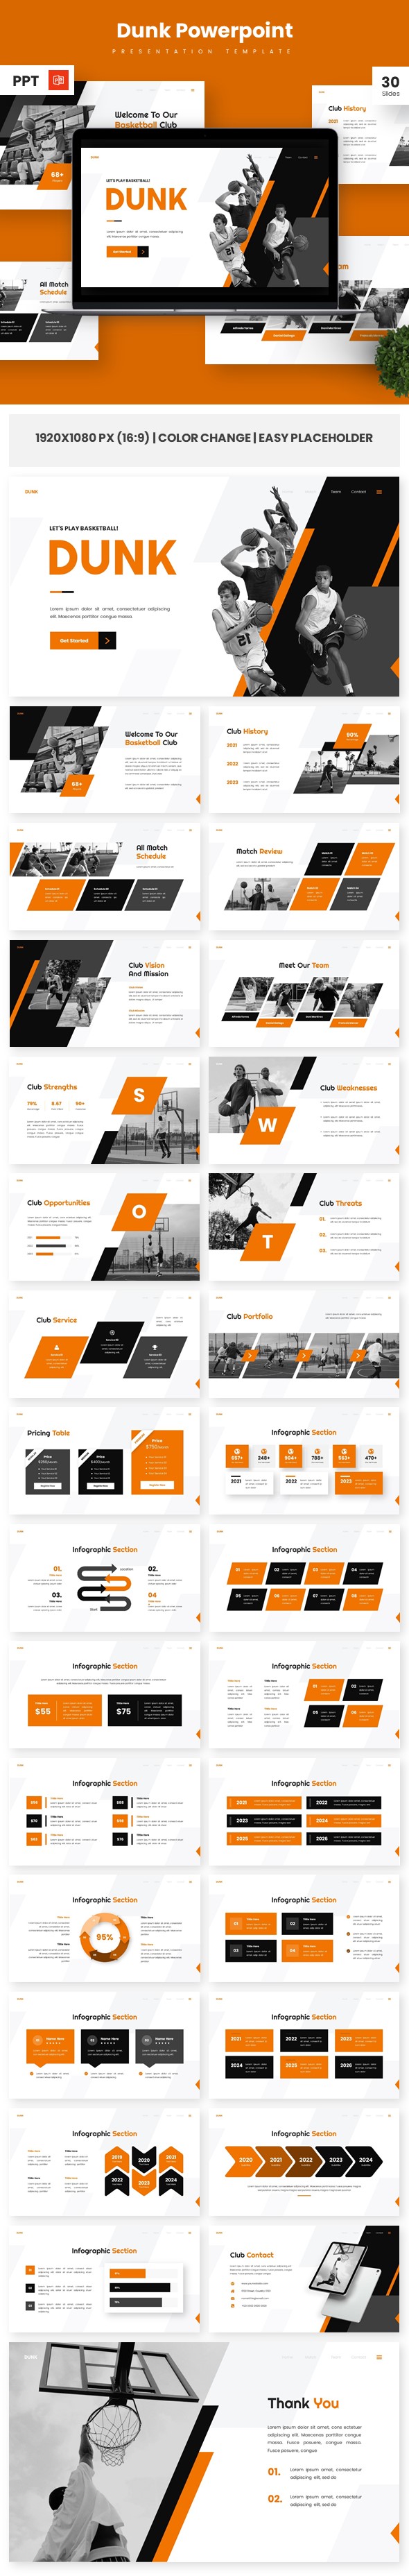 [DOWNLOAD]Dunk - Basketball & Sports Powerpoint Templates